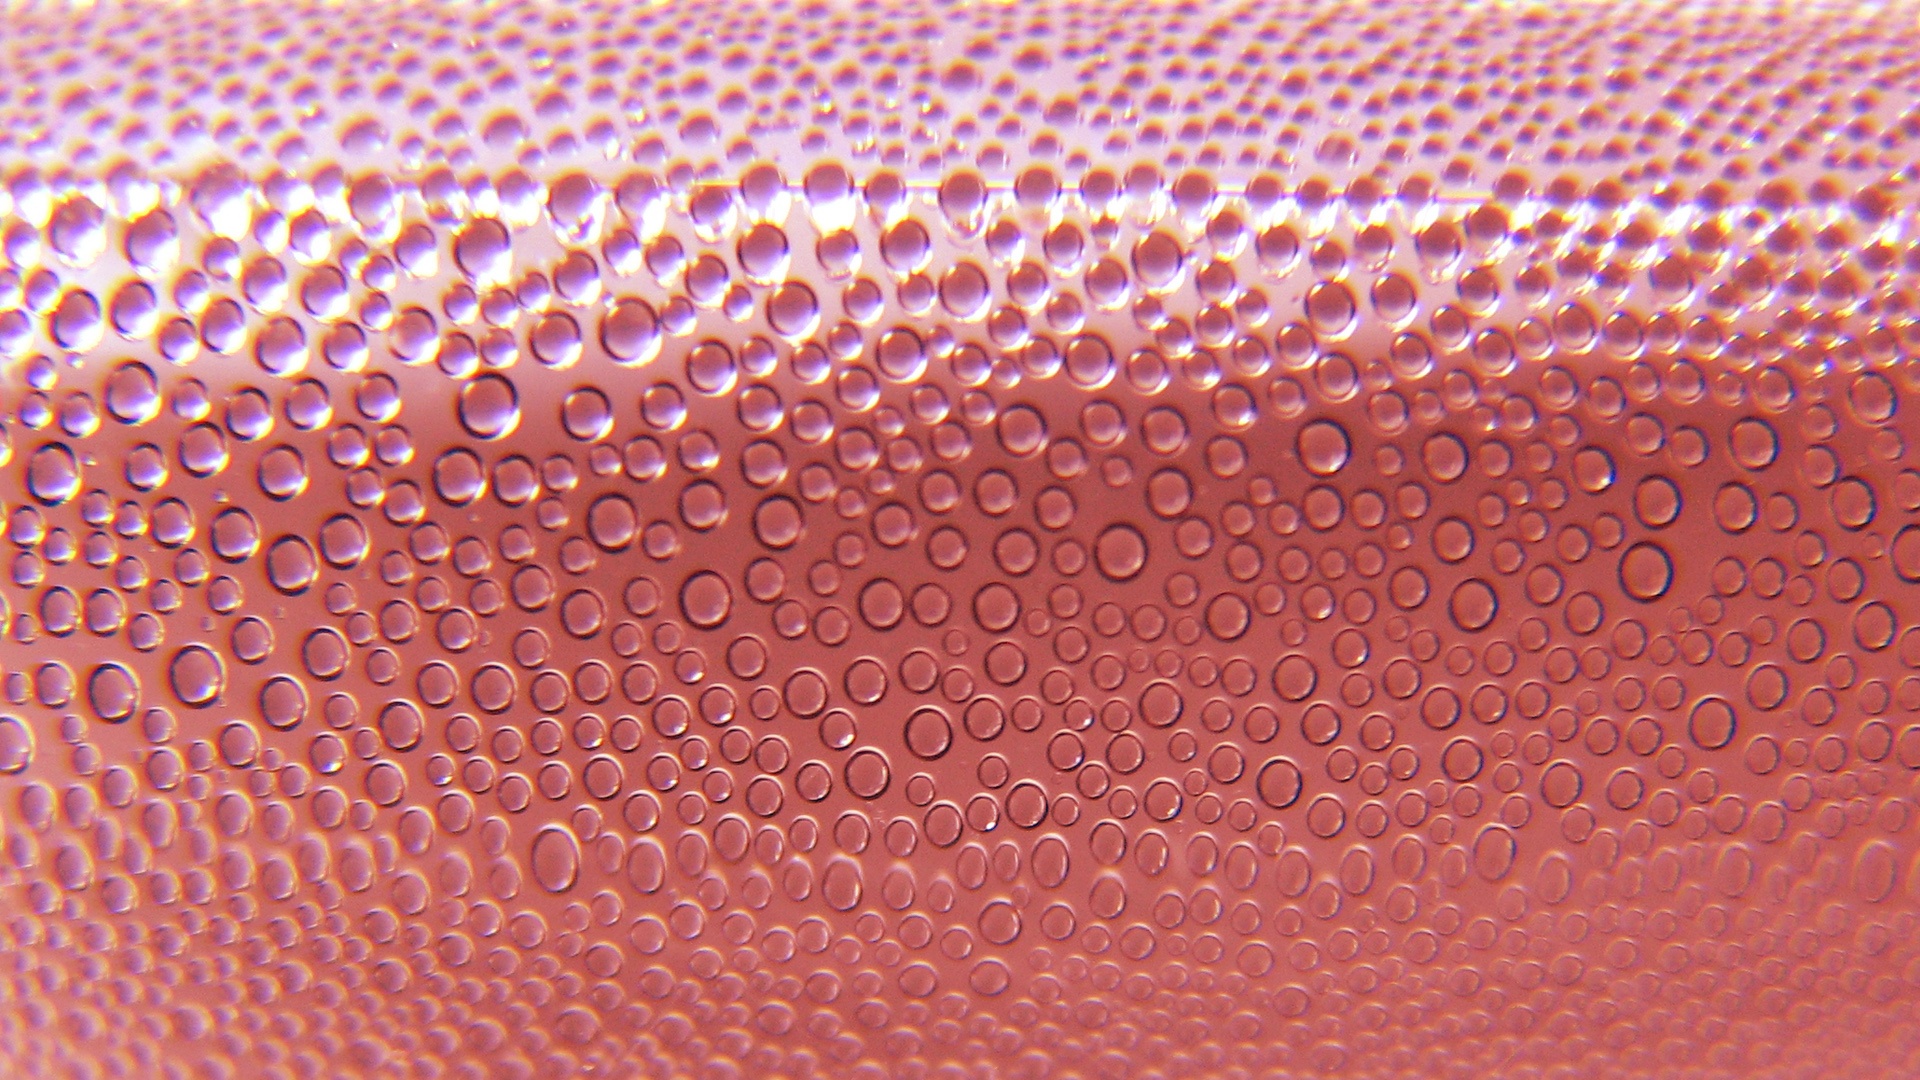 Water Drops On Pink Surface Wallpaper